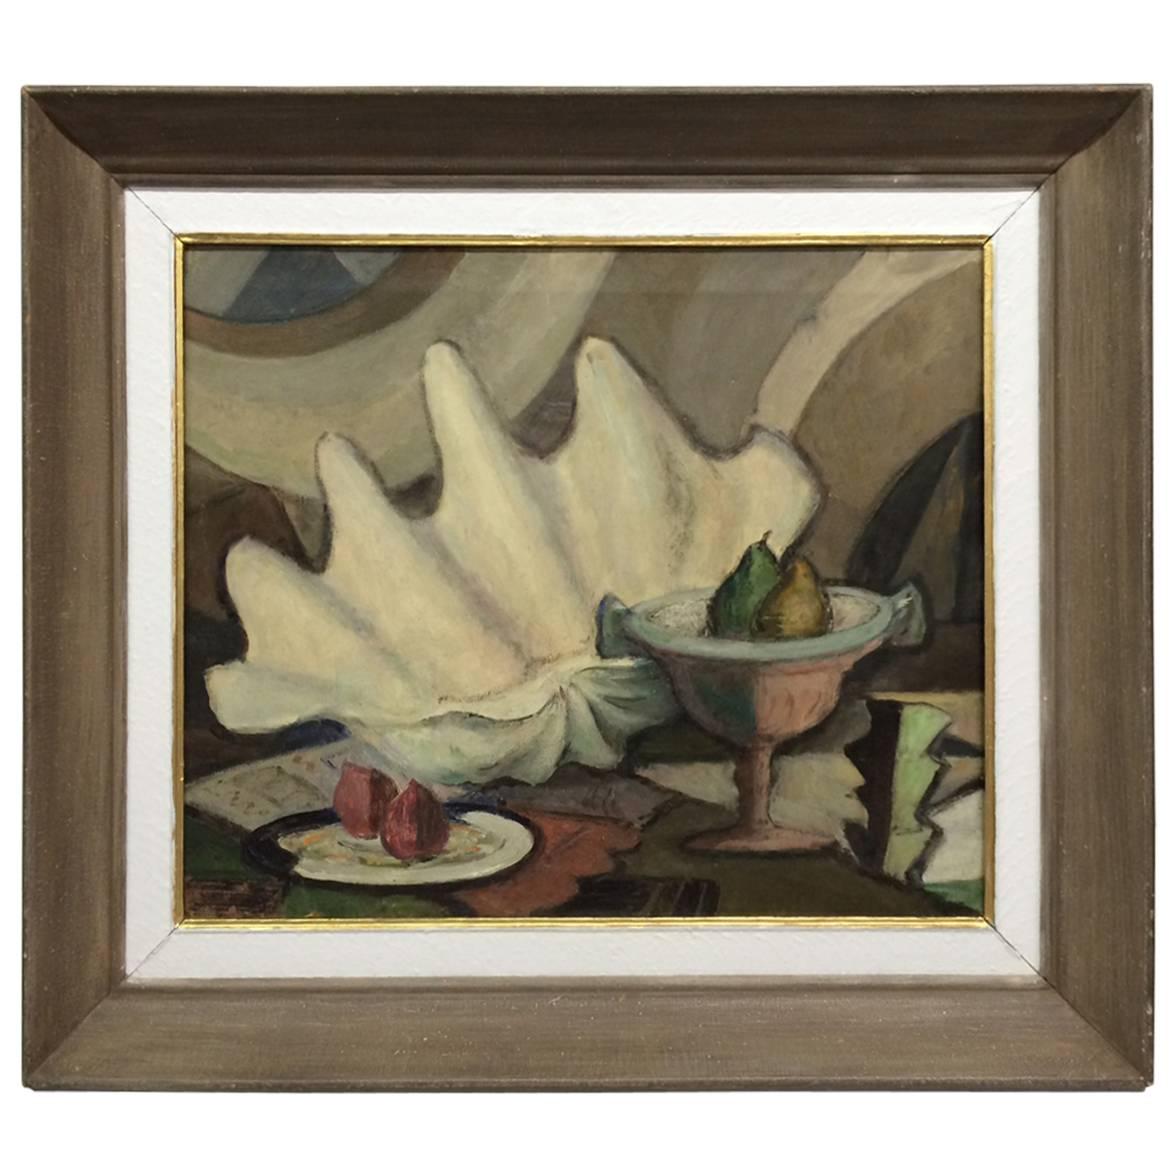 1940s Still Life Composition Painting with Fruit and Giant Clam